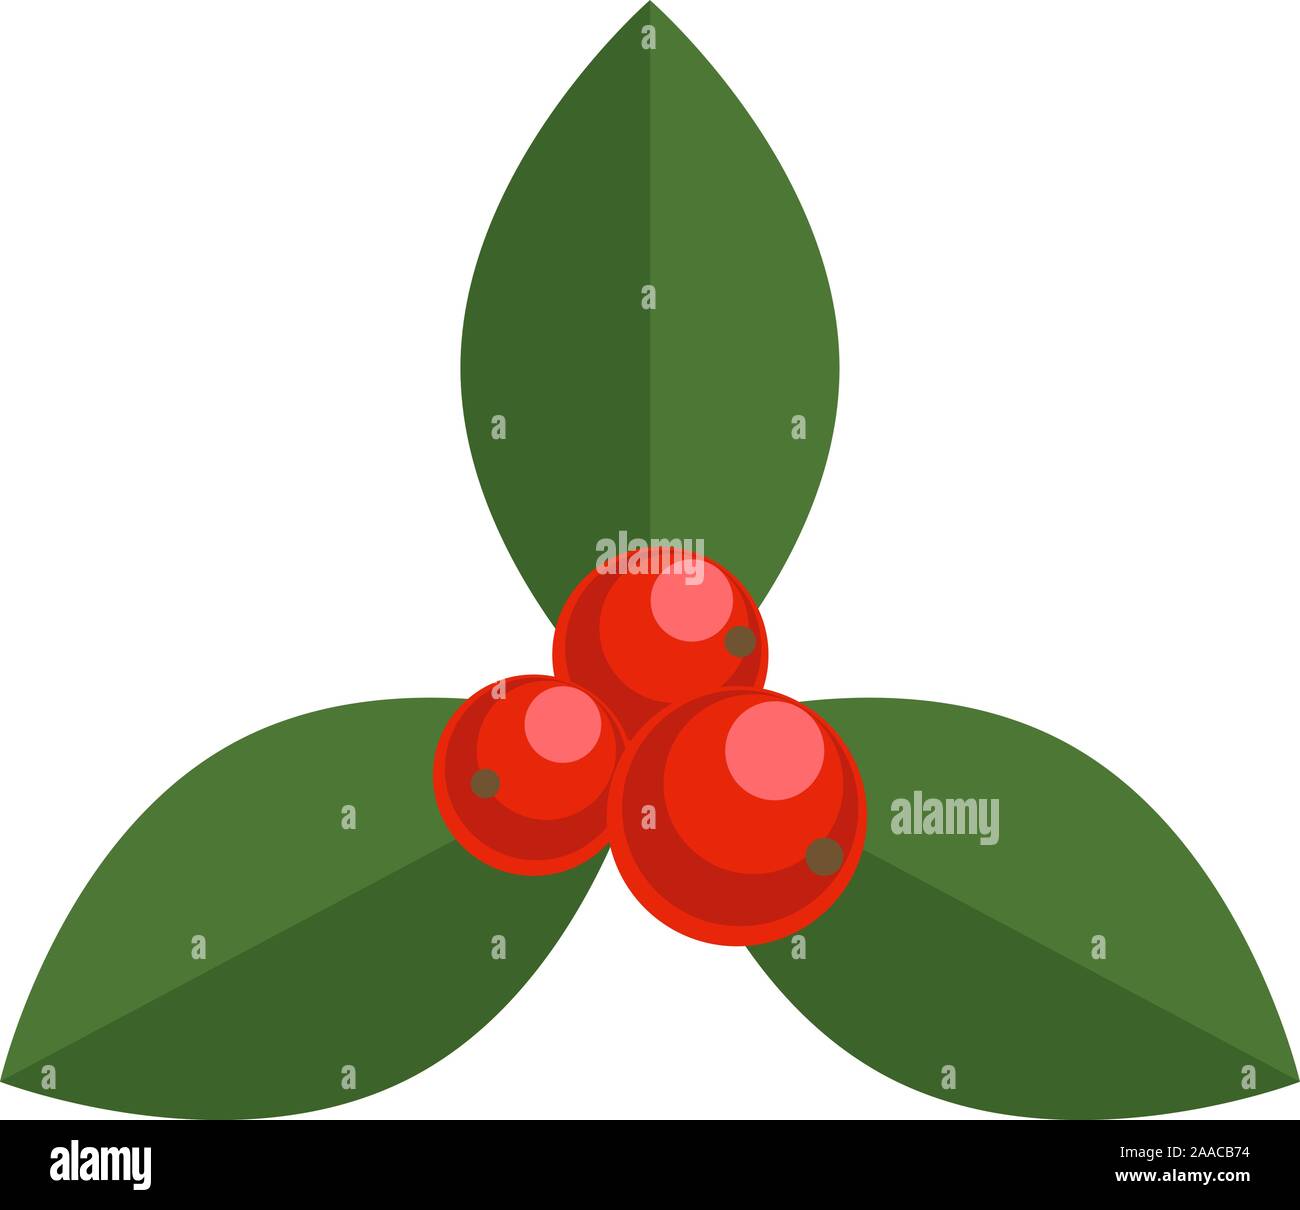 Holly berry Christmas icon. Element for design. Cartoon simple mistletoe decorative red and green ornament. Stock Vector